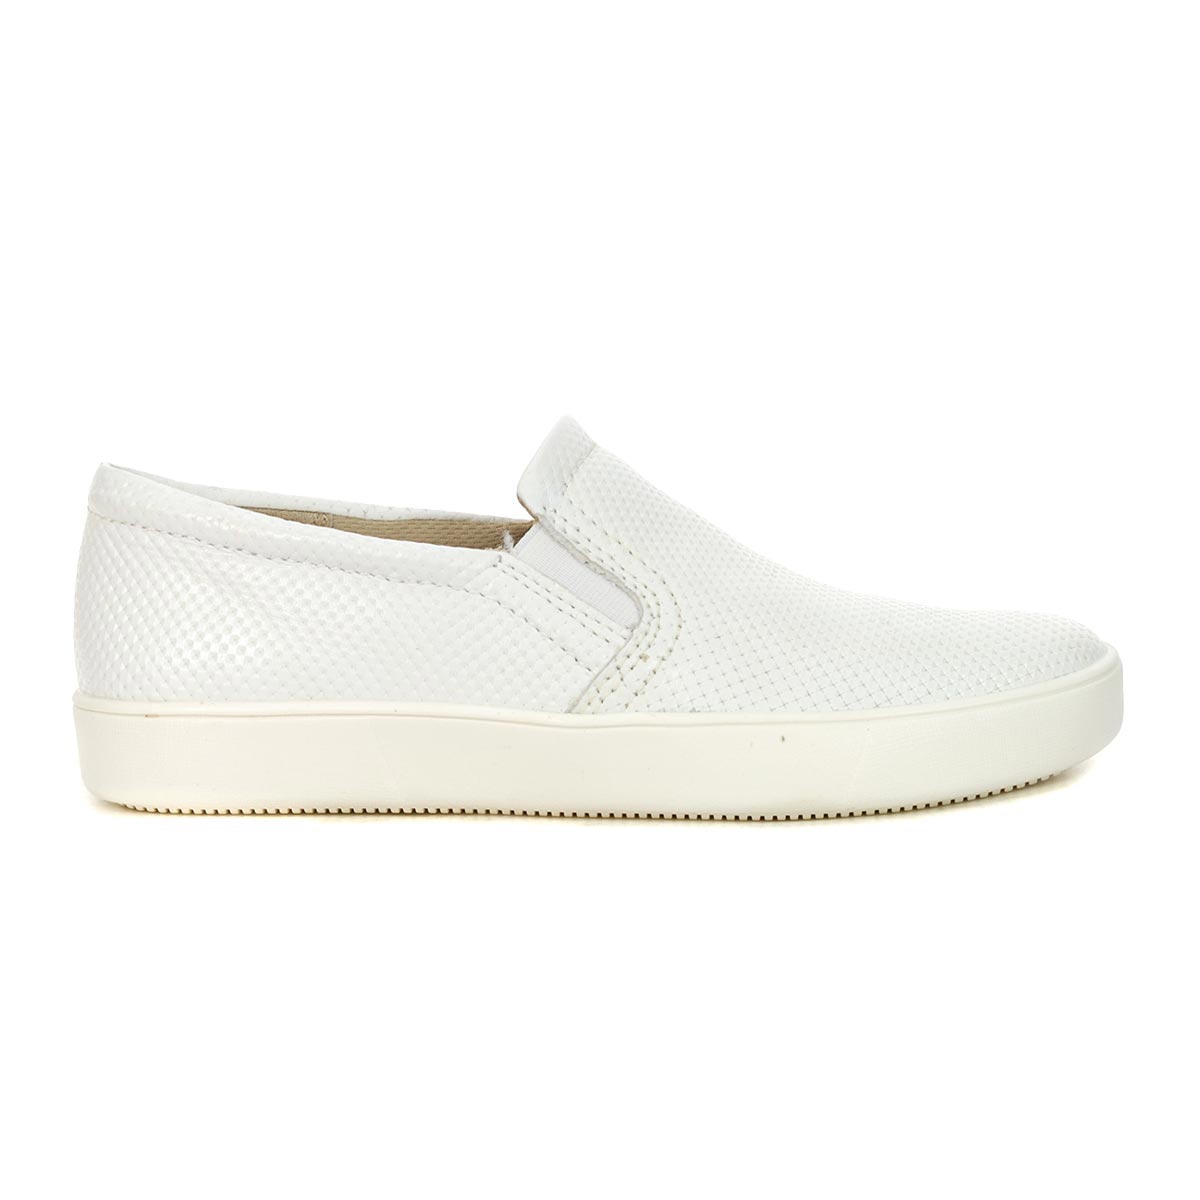 Naturalizer Marianne White Leather Slip-On Sneakers - WOOKI.COM